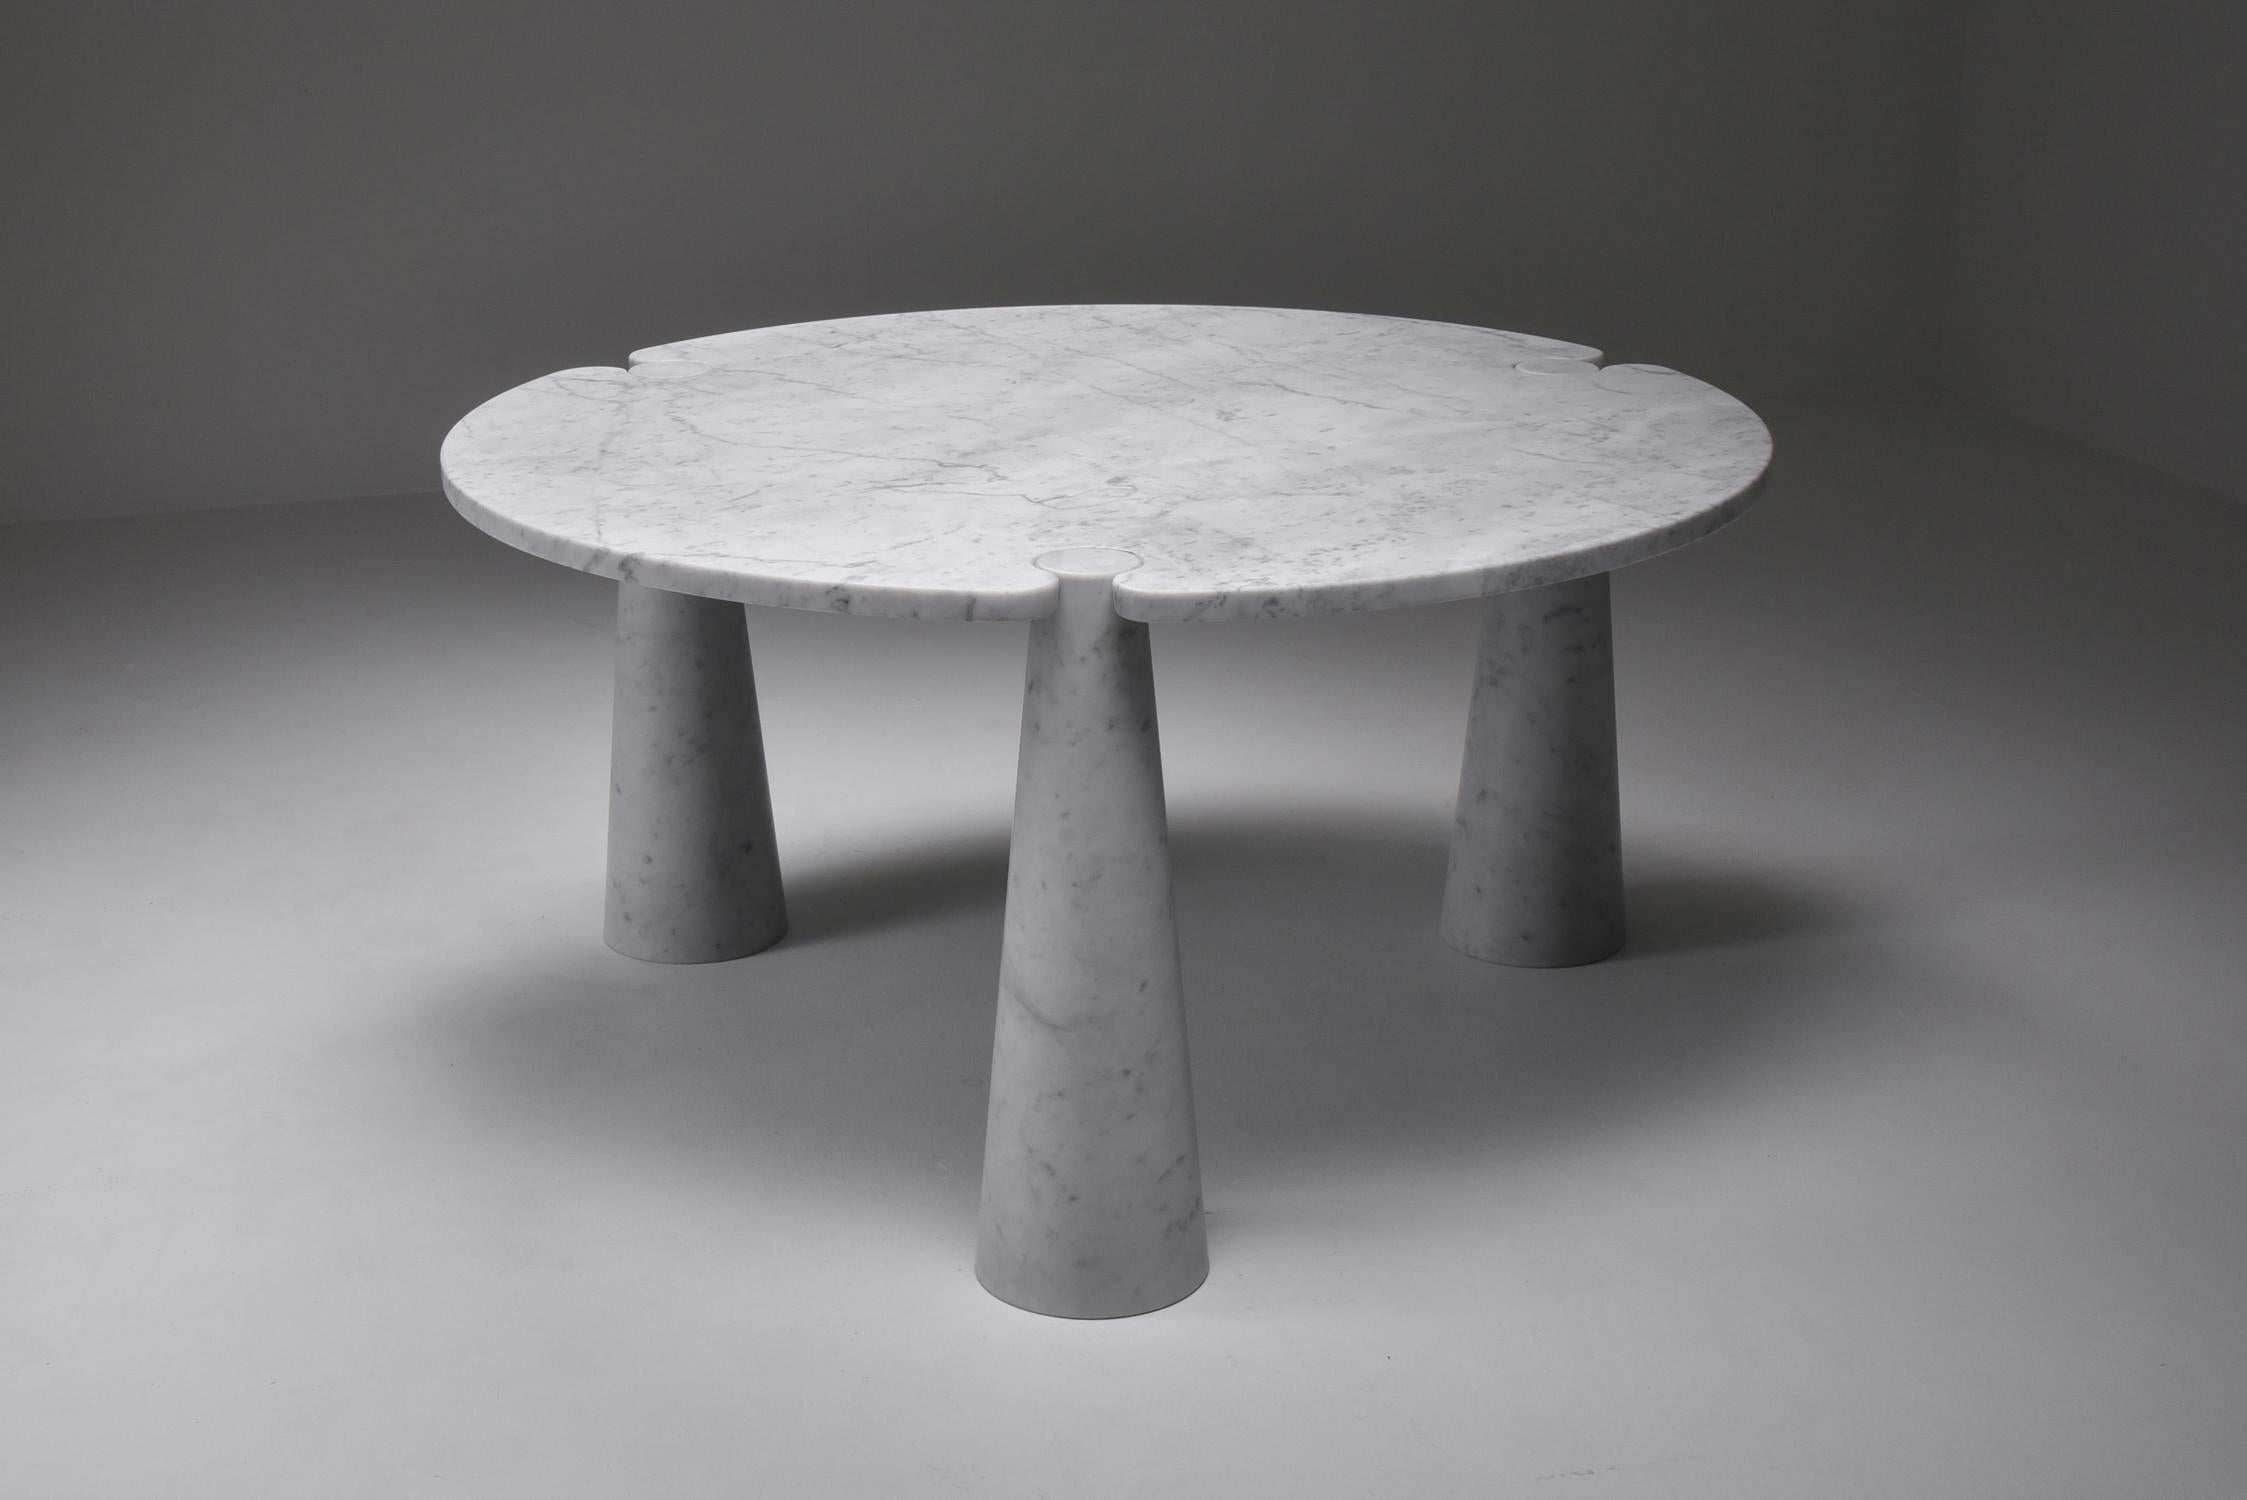 Angelo Mangiarotti, dining table ‘Eros’, round, white marble, the 1970s 

This sculptural table by Angelo Mangiarotti is a skillful example of postmodern design. The table is executed in white marble. The oval tabletop features no joints or clamps